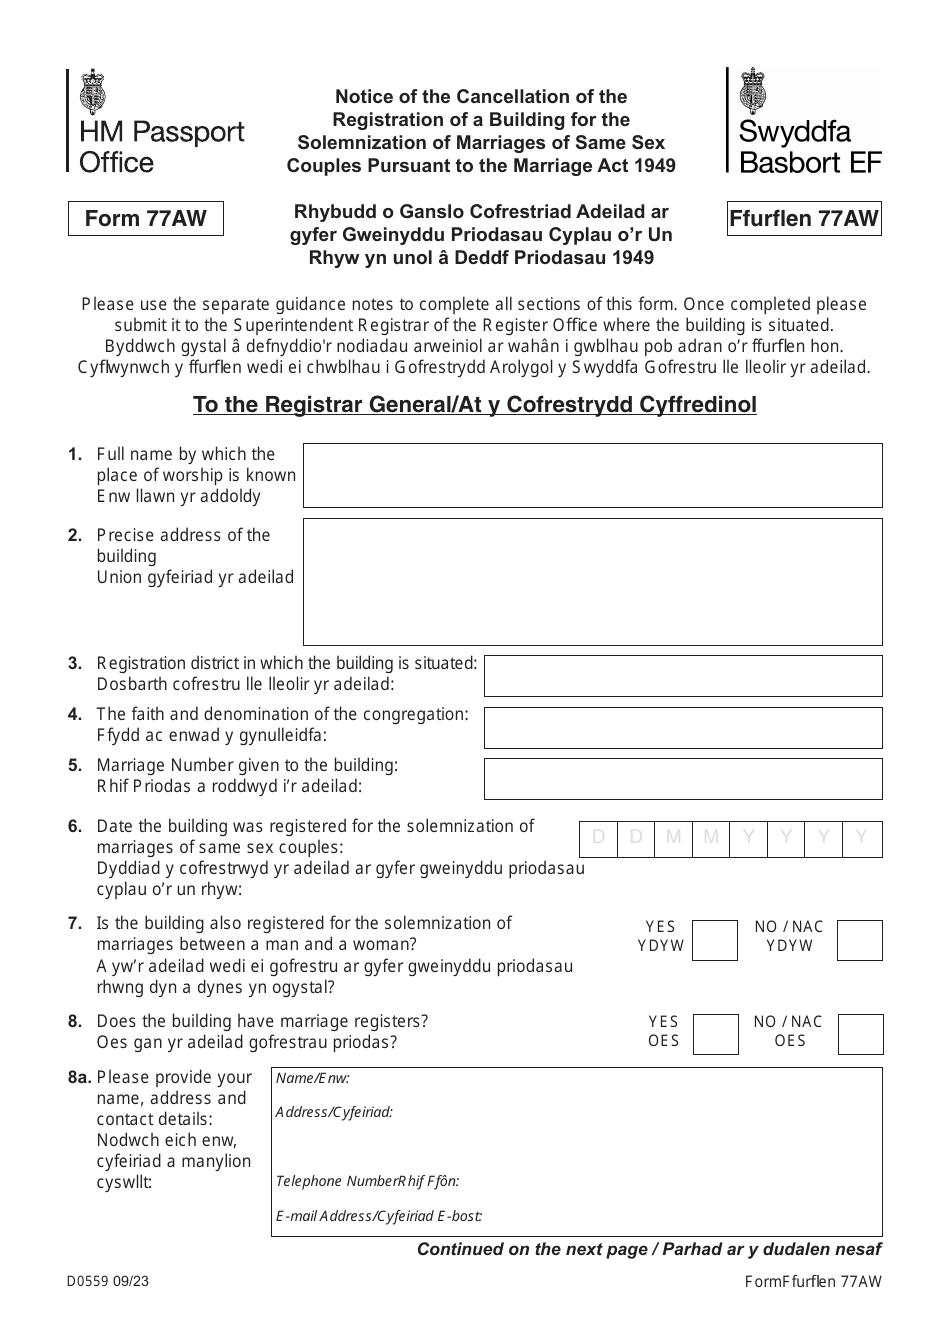 Form 77AW Notice of the Cancellation of the Registration of a Building for the Solemnization of Marriages of Same Sex Couples Pursuant to the Marriage Act 1949 - United Kingdom (English / Welsh), Page 1